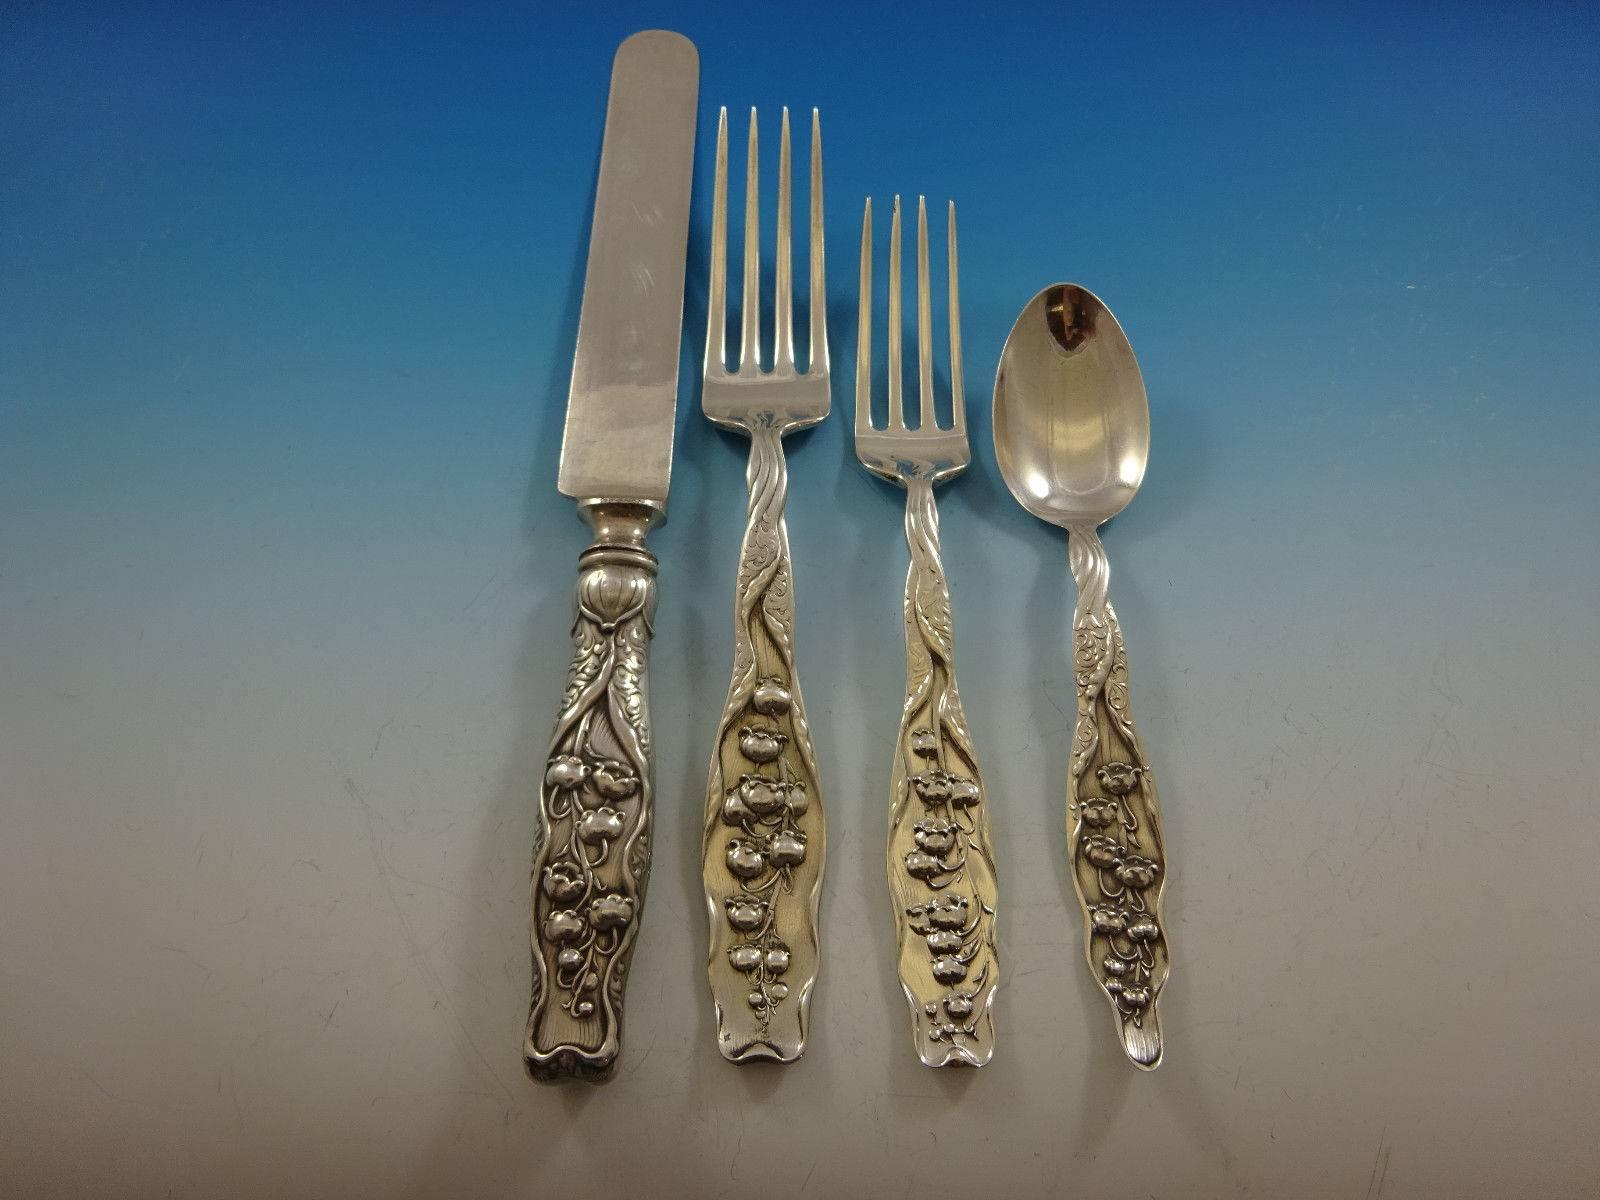 Art Nouveau, lily of the valley by whiting, circa 1885, sterling silver dinner size flatware set of 48 Pieces. This set includes:

12 dinner size knives, 9 5/8